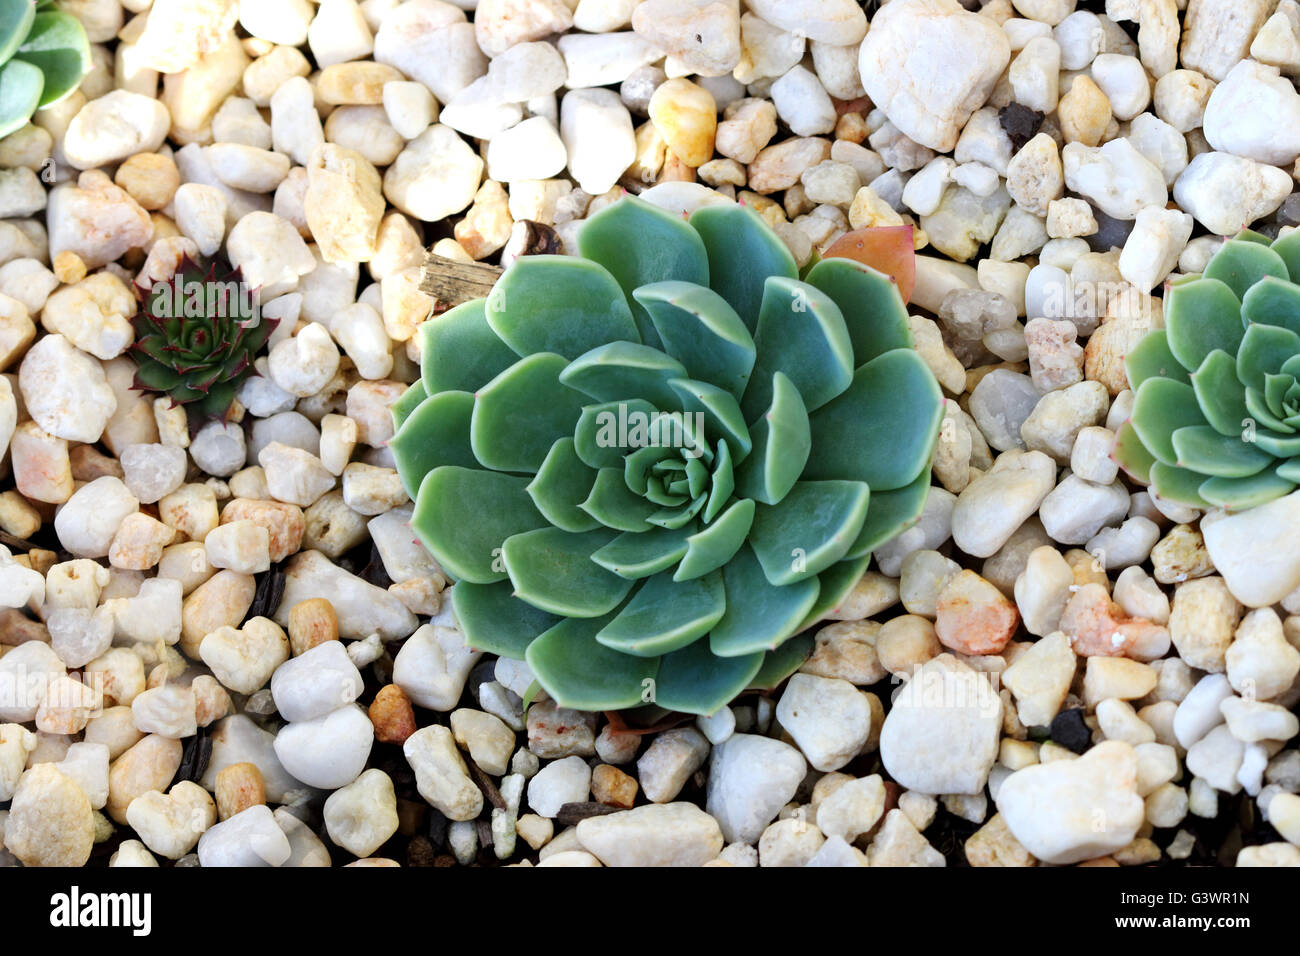 Close up  Echeveria glauca or known as Aeonium or known as Green Rose succulent growing in a pot with gravel Stock Photo